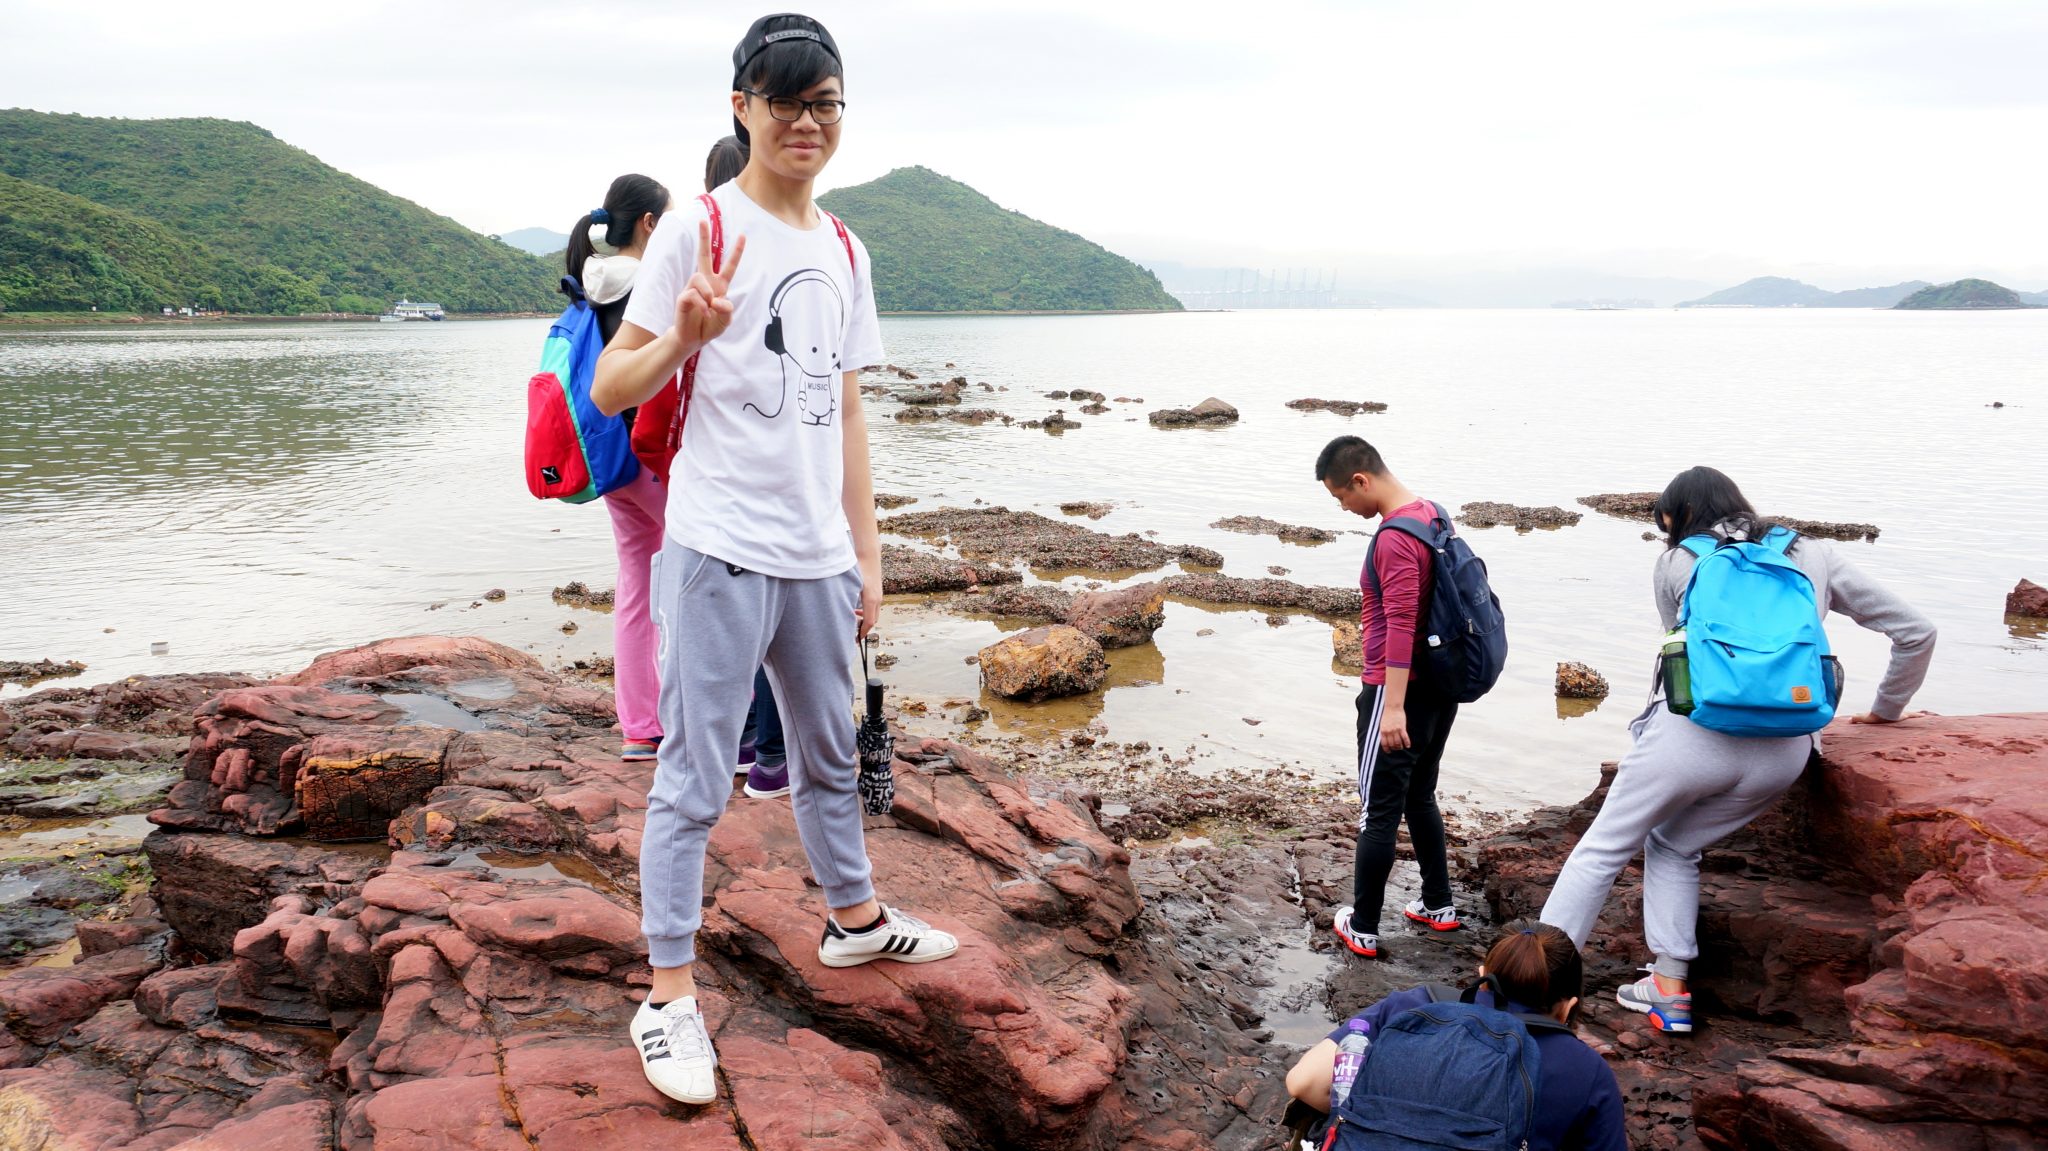 Students felt very excited to see different geological features along the coast of northeastern Hong Kong. 同學們看到香港東北海岸不同的地質特徵感到很興奮。